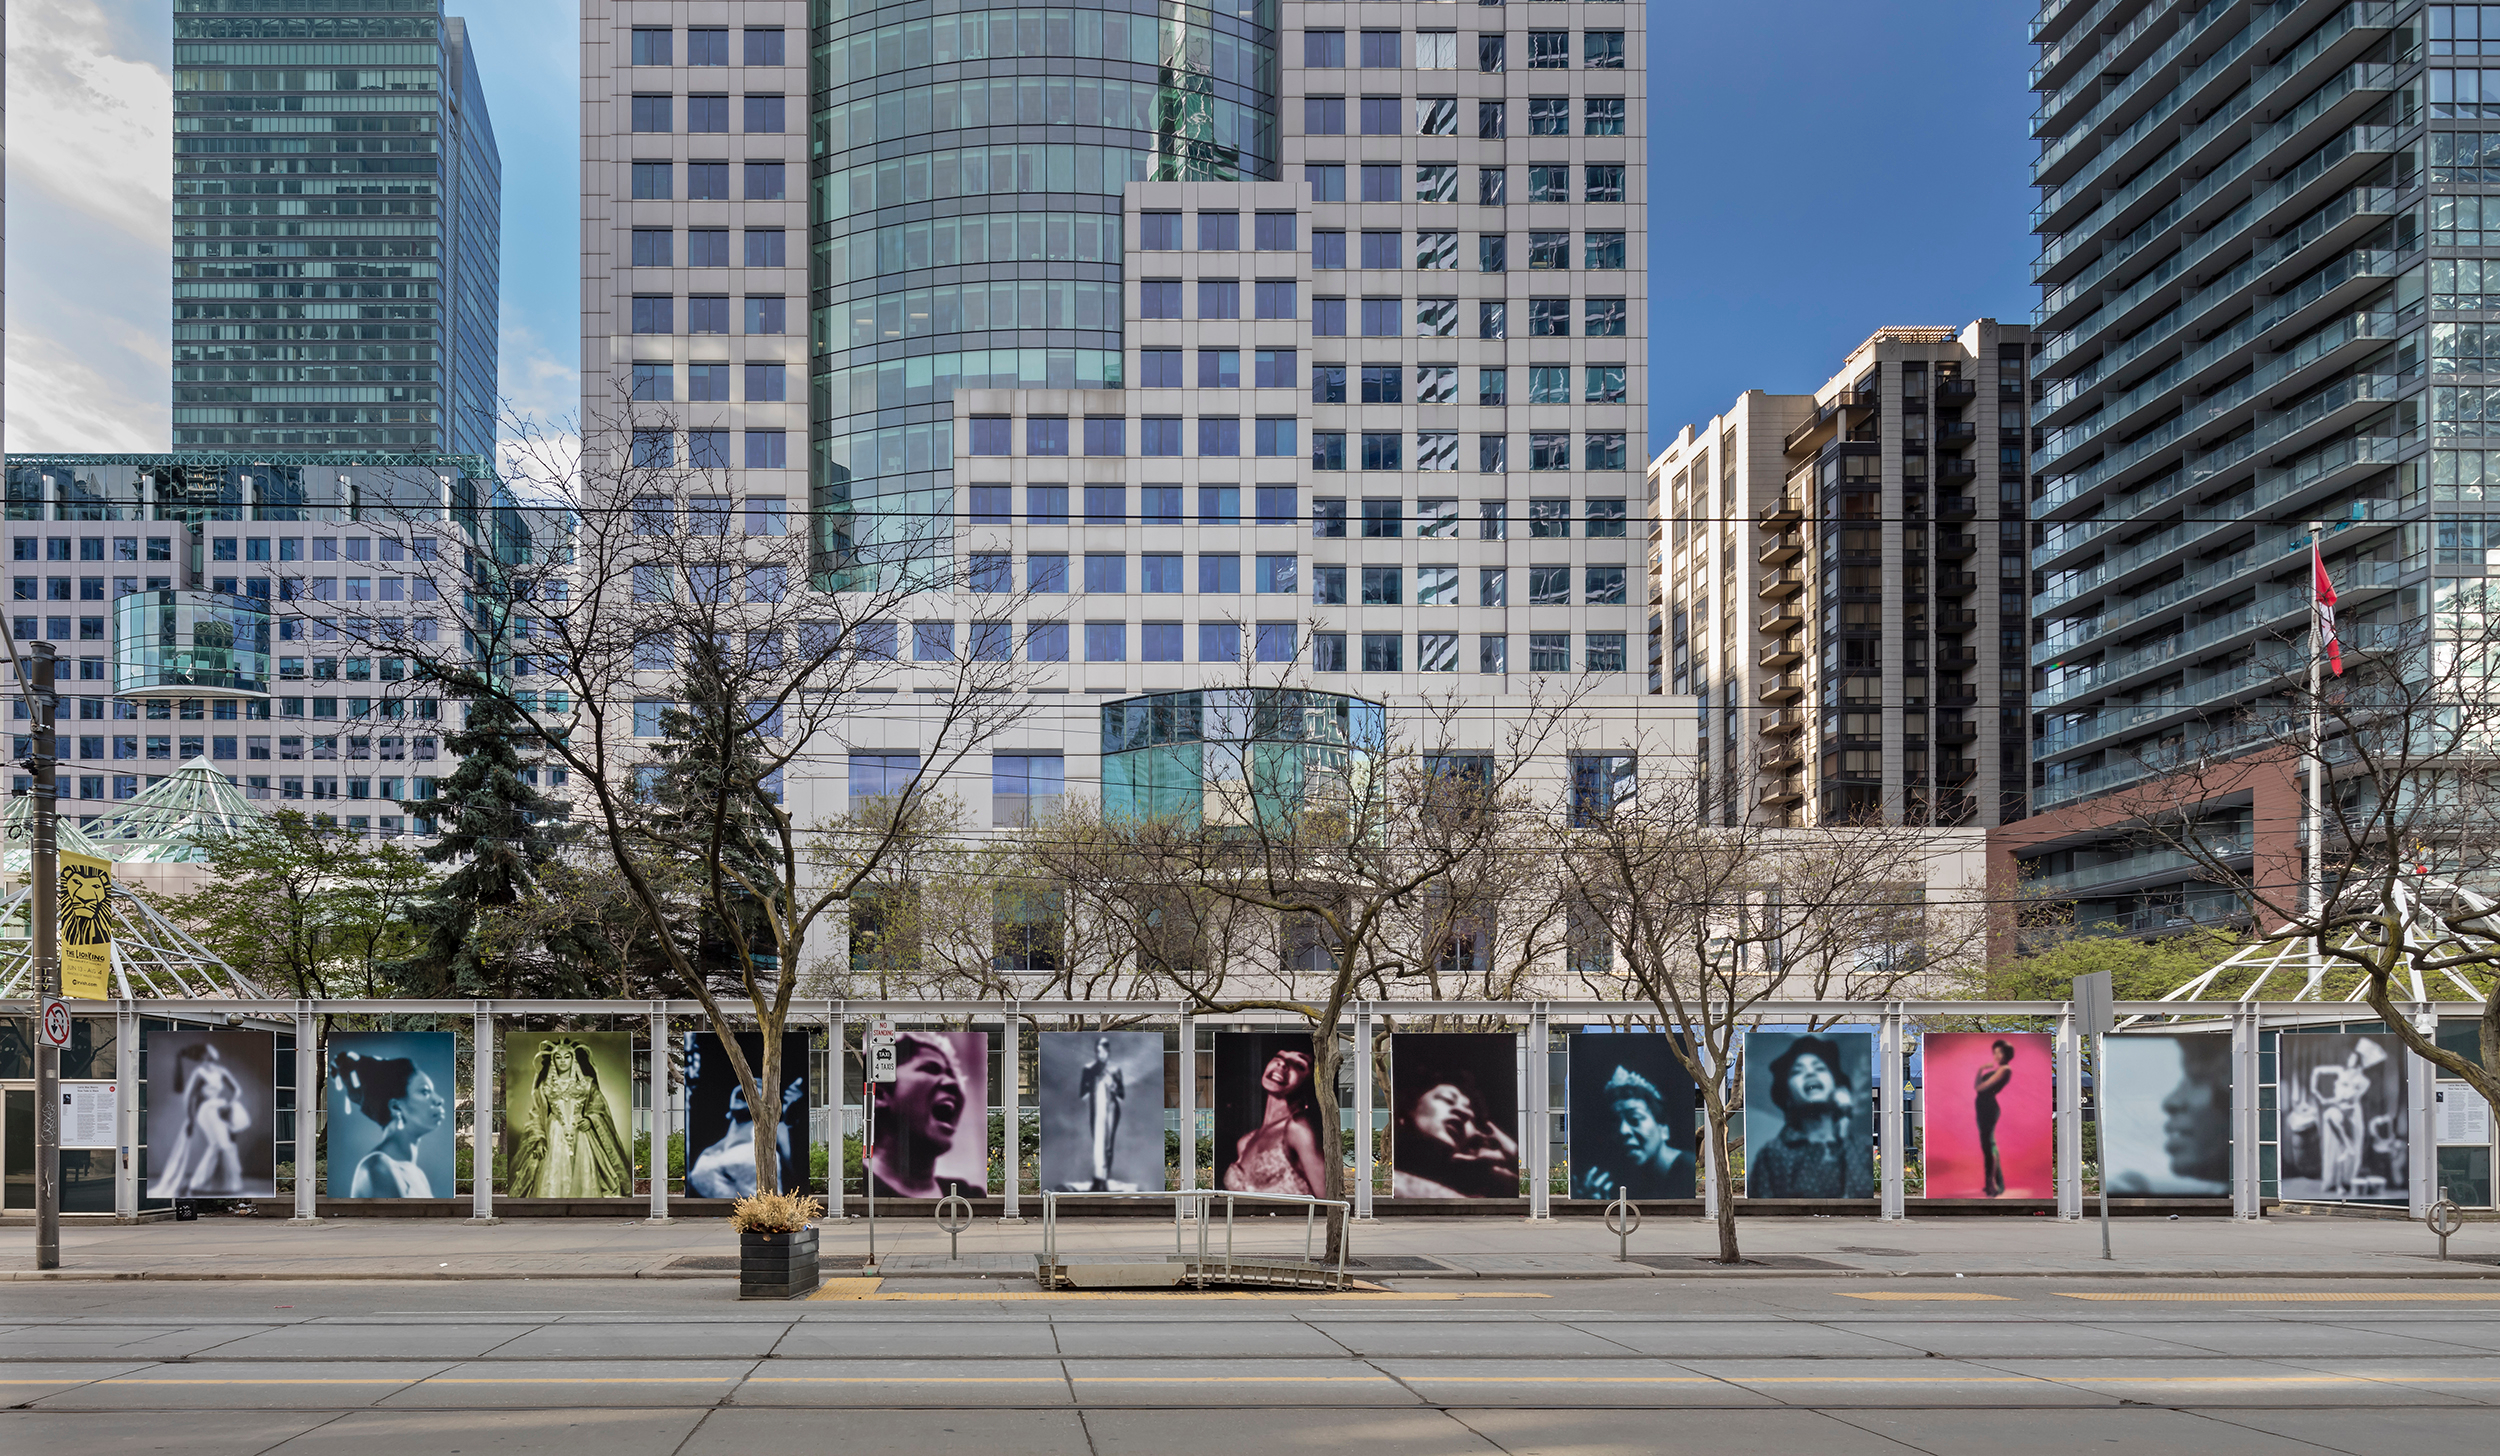     Carrie Mae Weems, Slow Fade to Black, 2010., Public Installation at Metro Hall, King St. W. at
John St., Toronto, April 23–June 4, 2019. Photo: Toni Hafkenscheid. Courtesy Scotiabank
CONTACT Photography Festival, the artist, and Jack Shainman Gallery, New York, NY.

